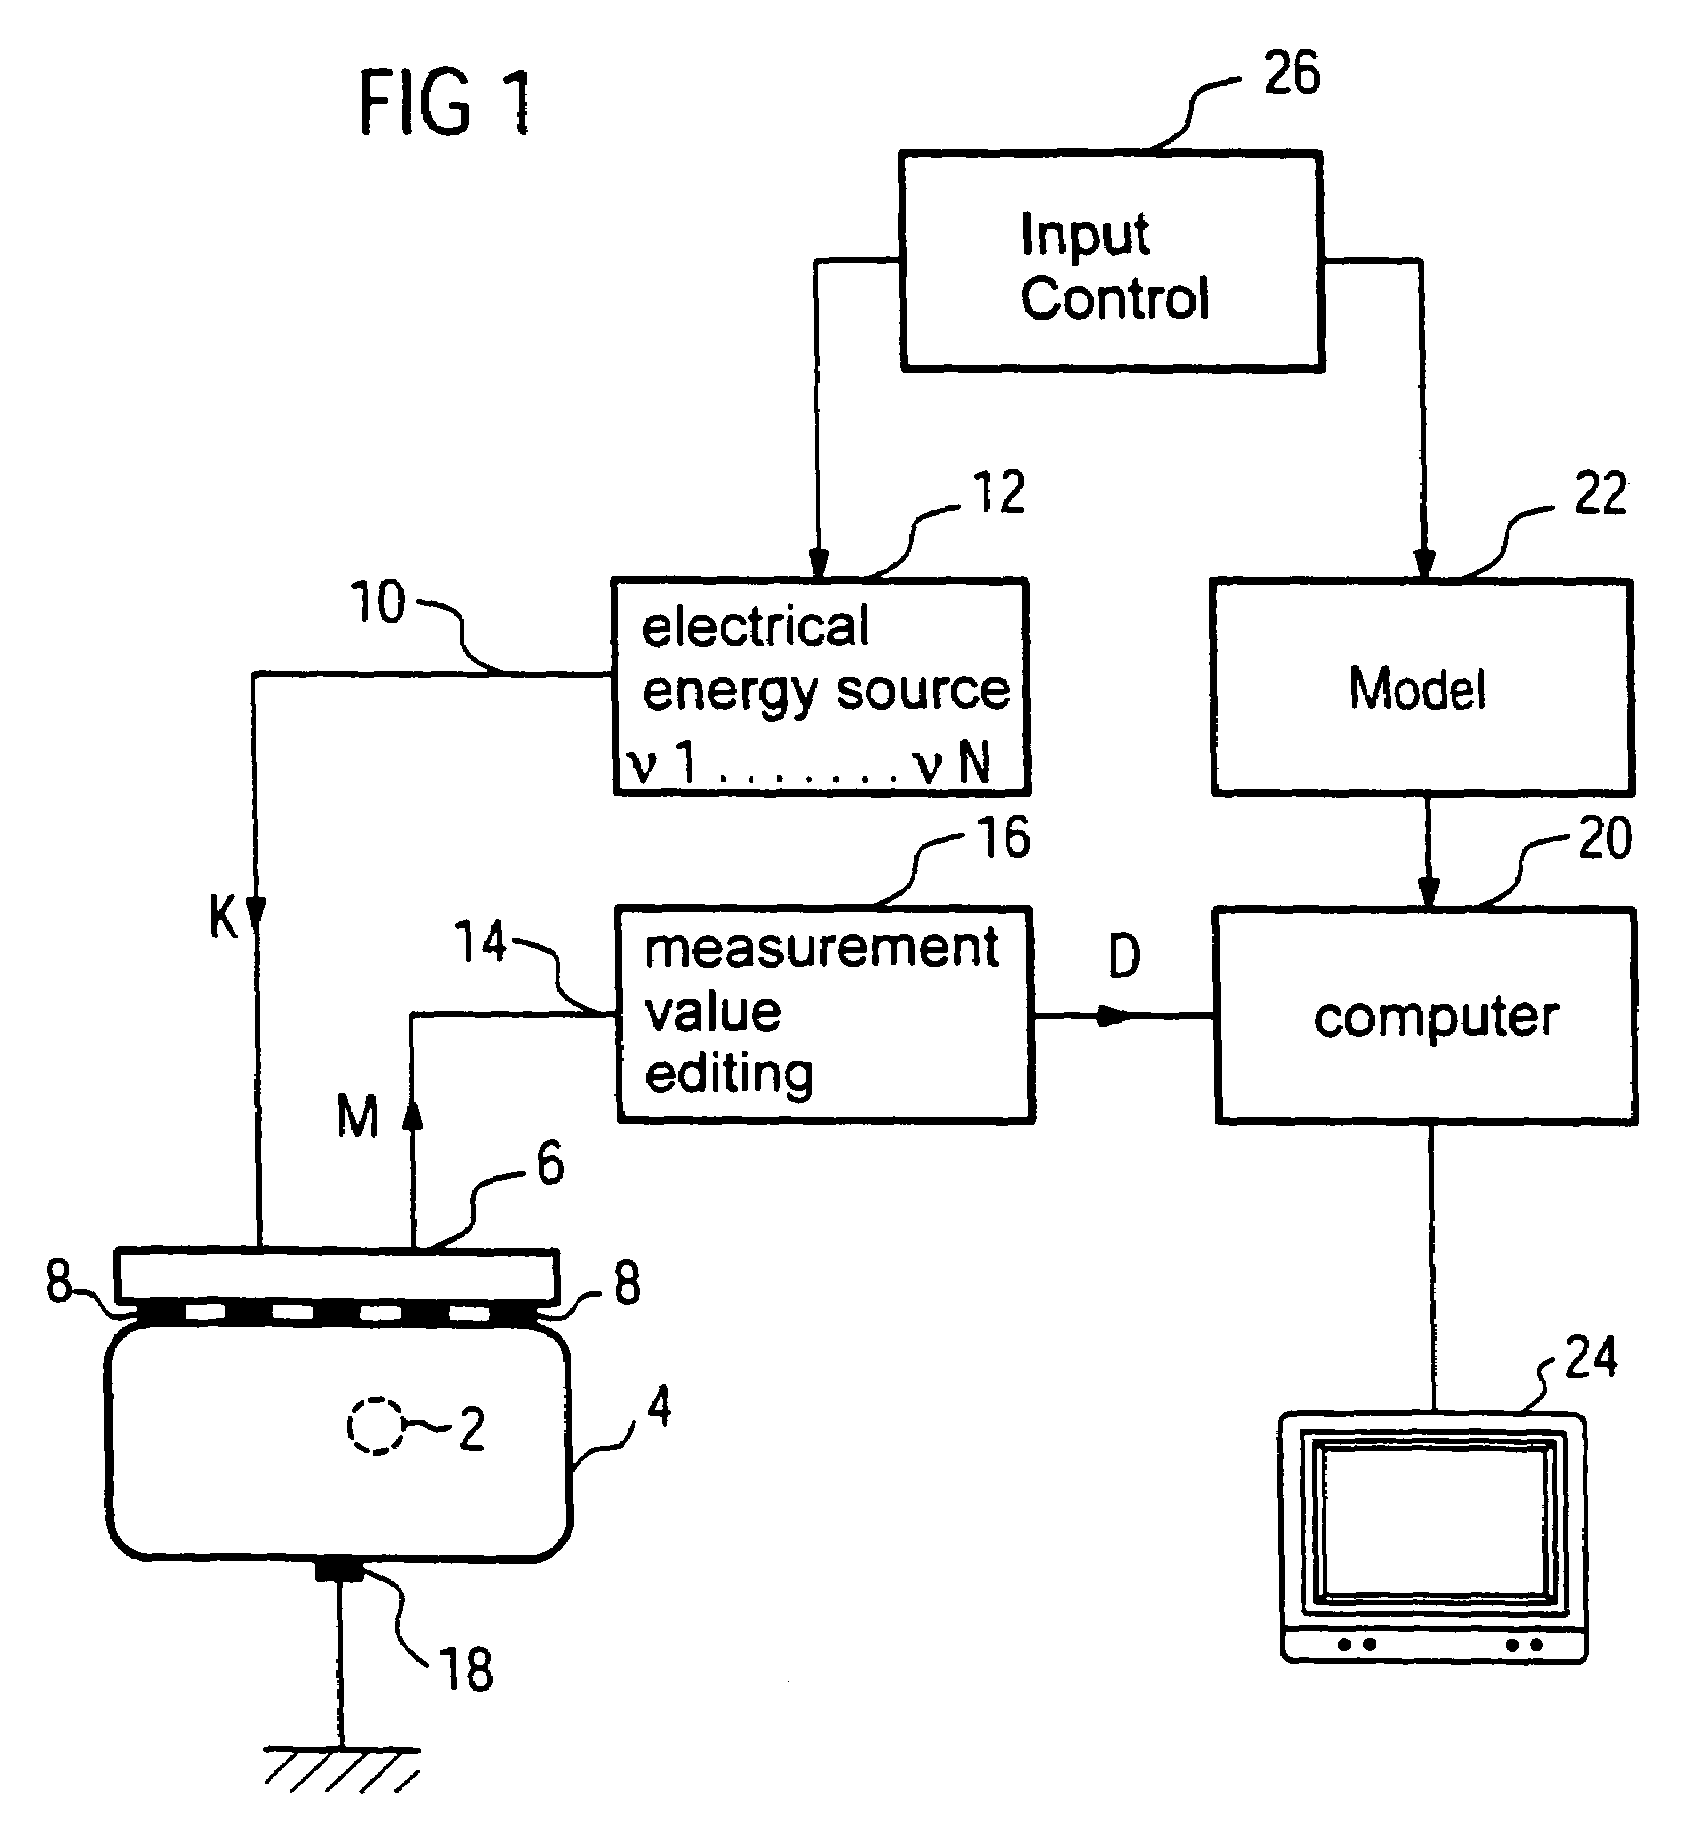 Apparatus for localizing a focal lesion in a biological tissue section